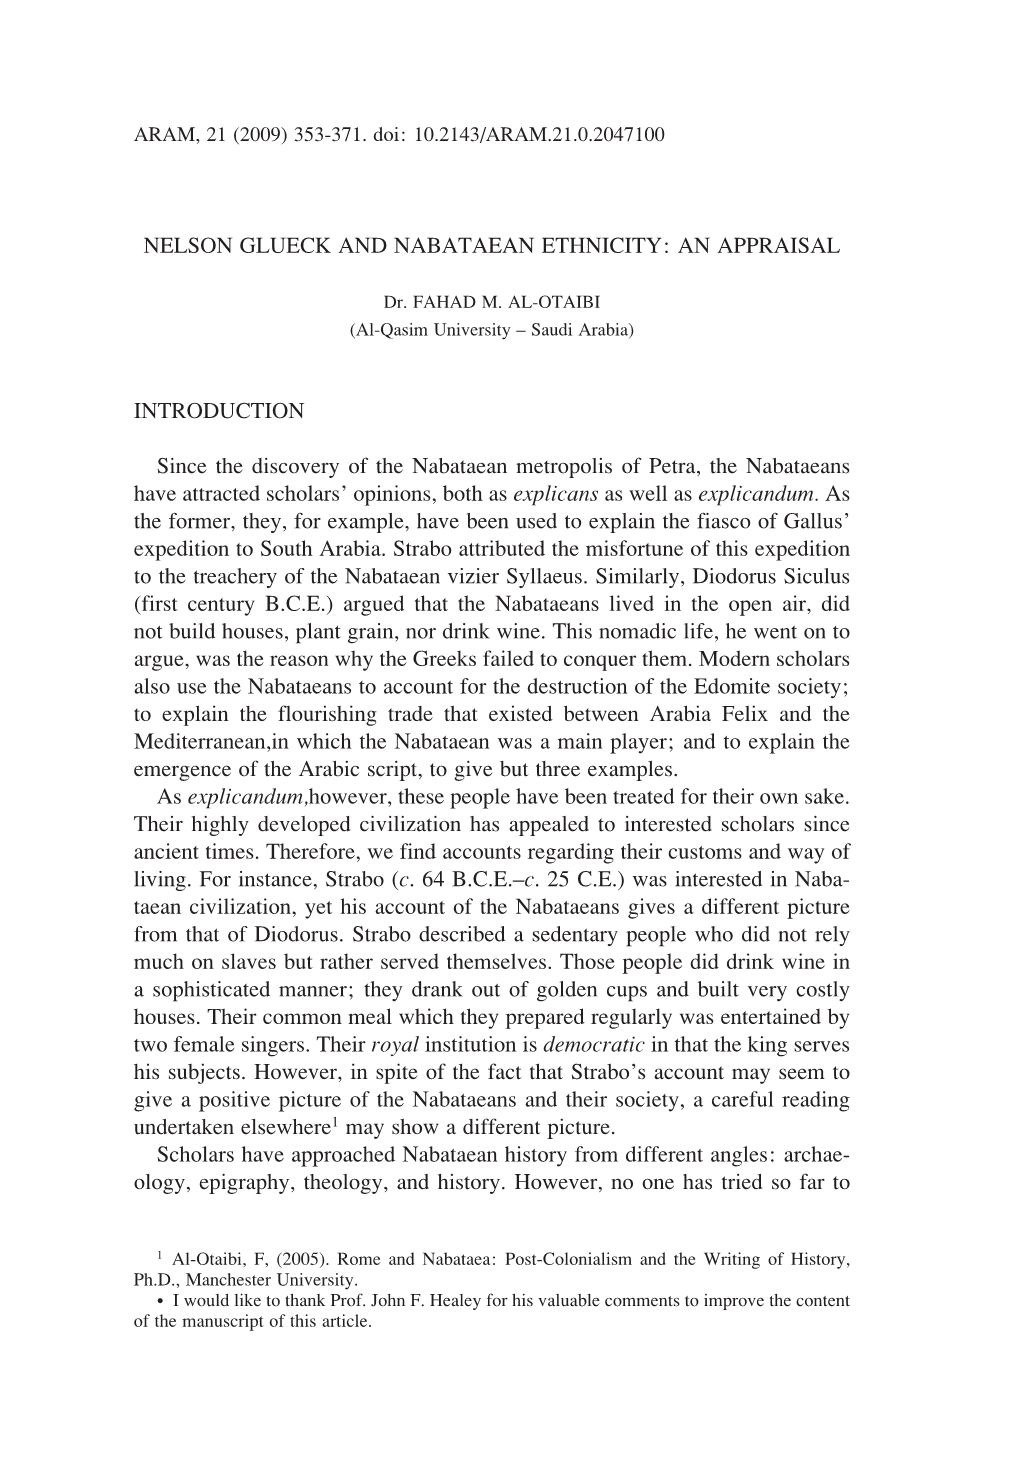 Nelson Glueck and Nabataean Ethnicity: an Appraisal